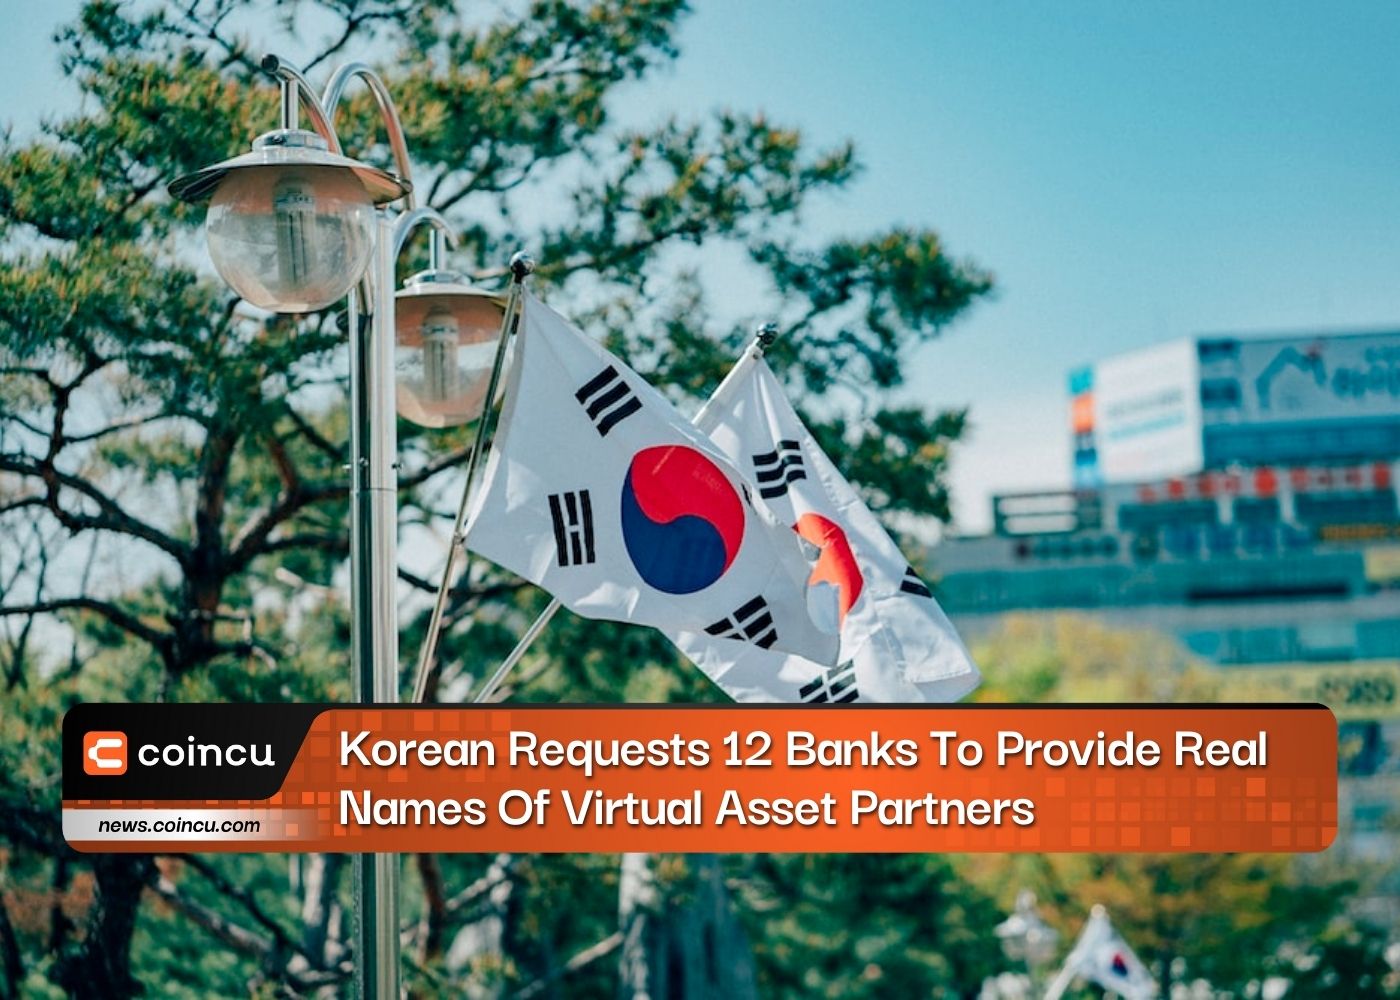 Korean Requests 12 Banks To Provide Real Names Of Virtual Asset Partners